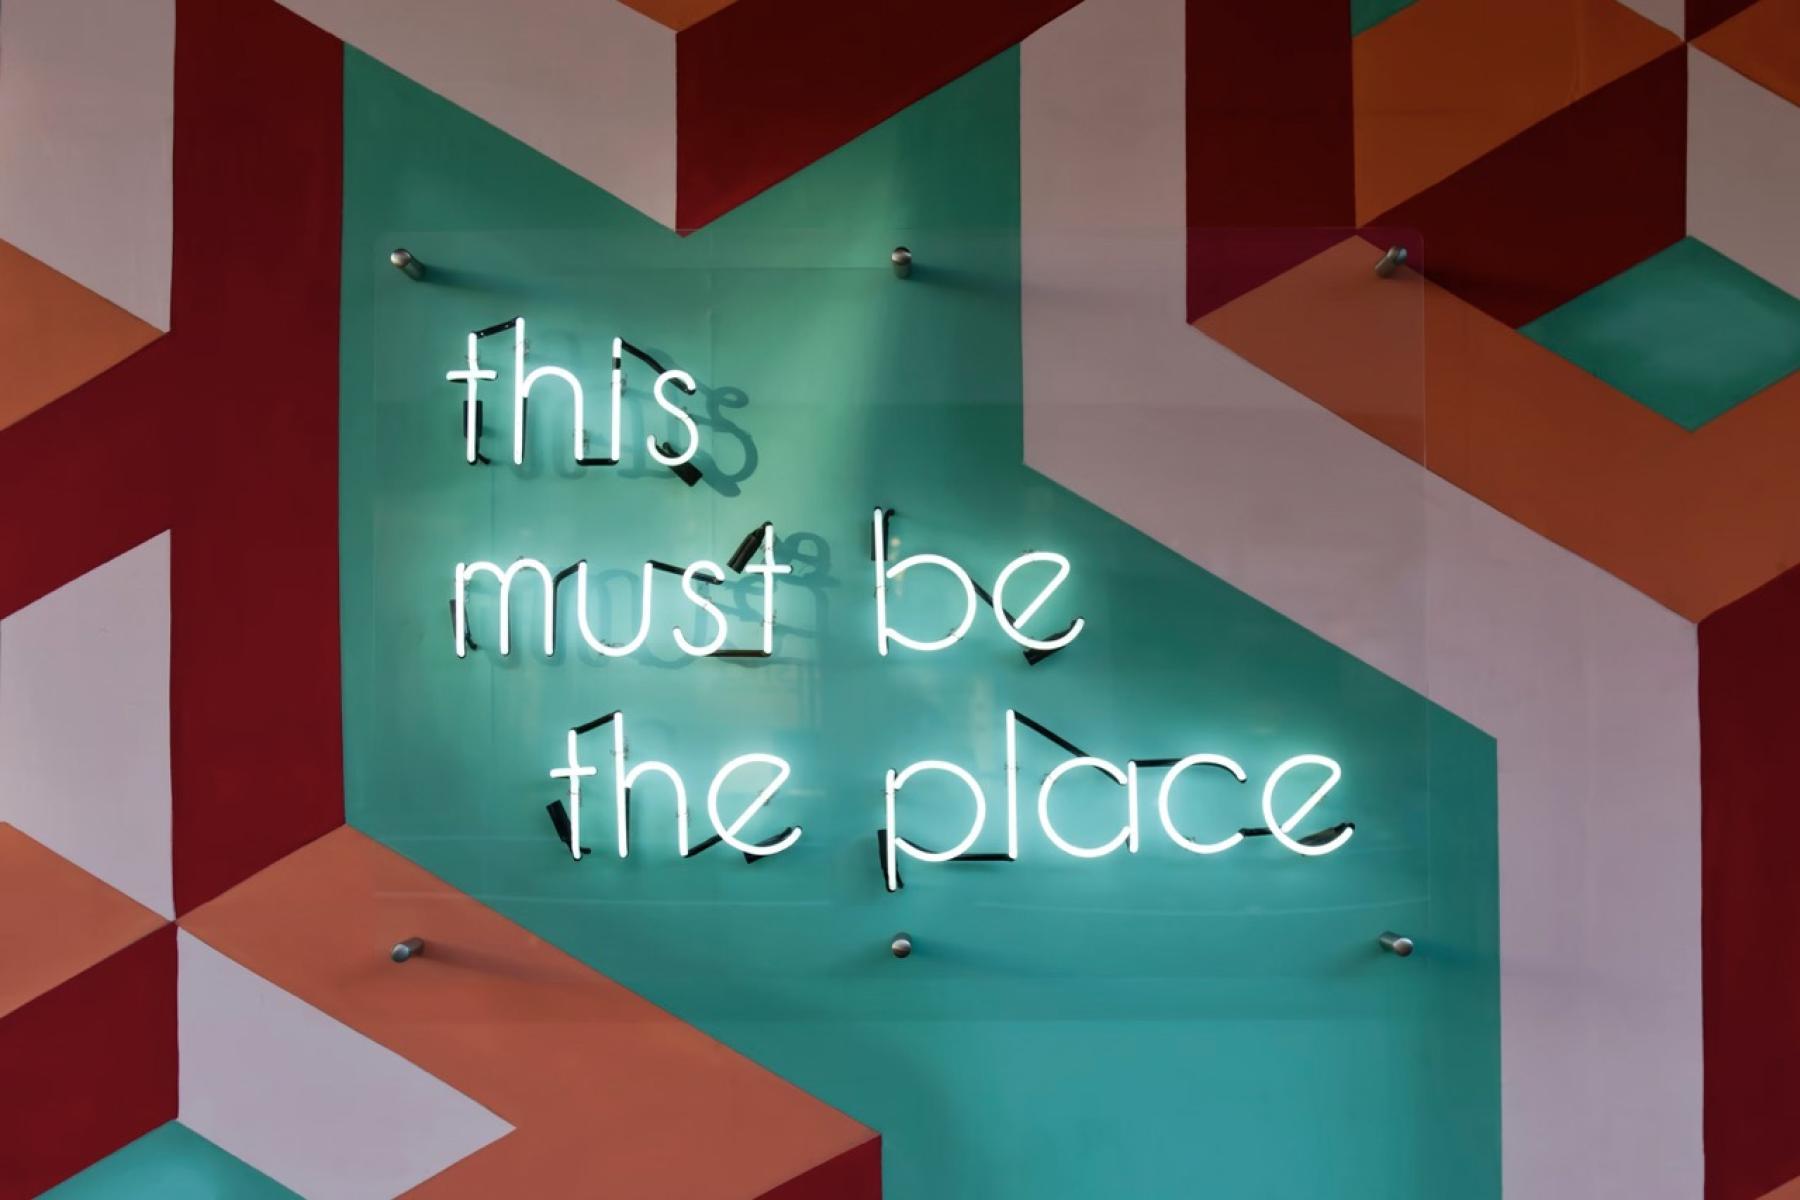 'This must be the place' neon sign